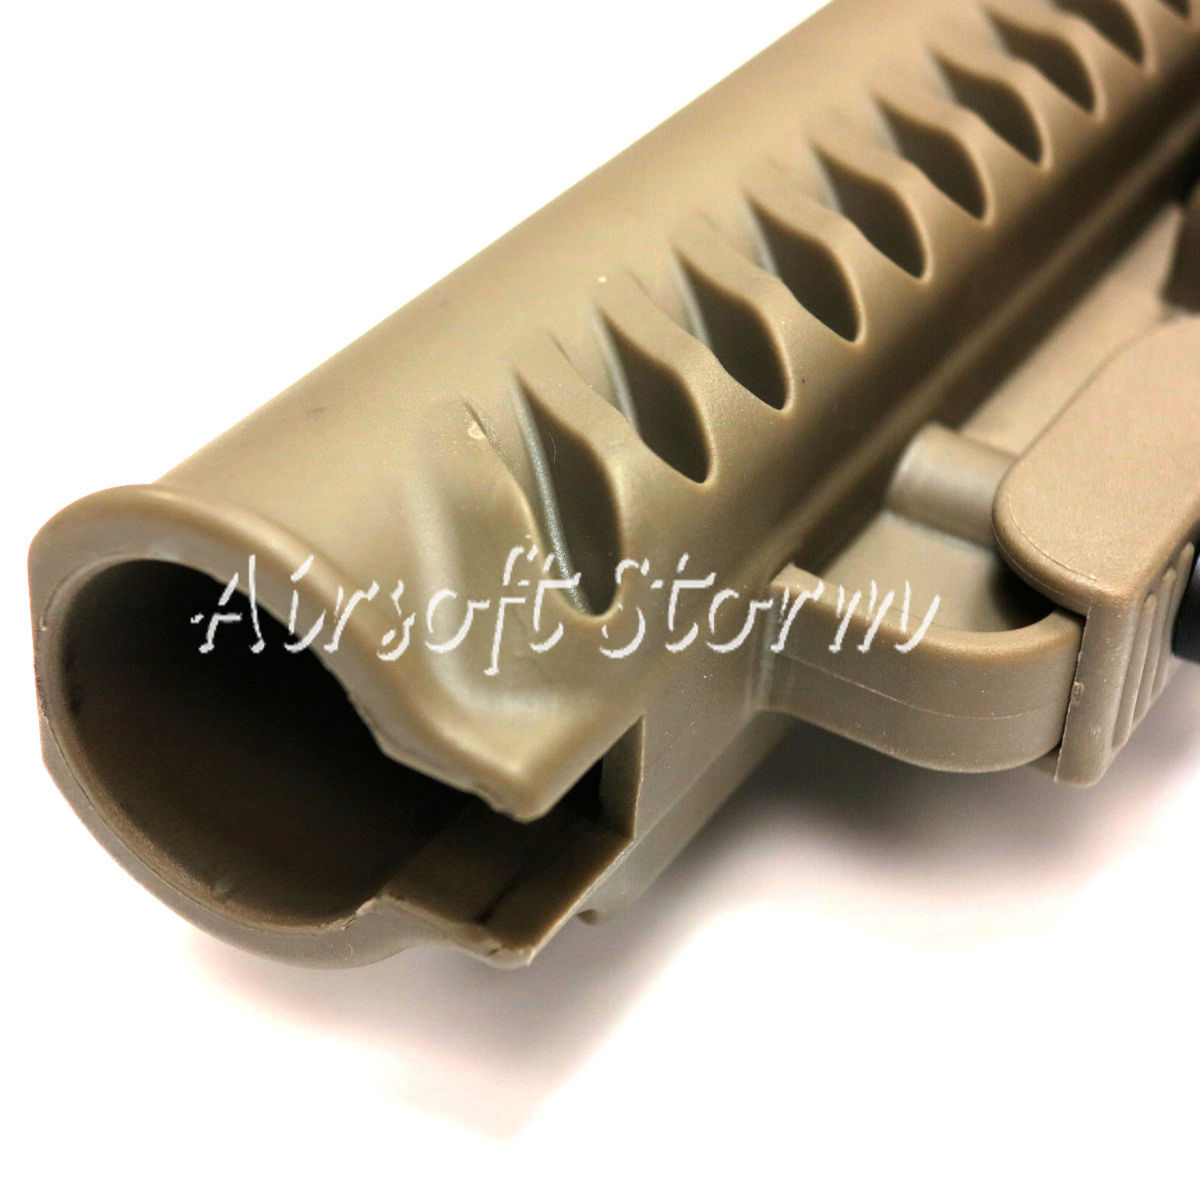 Airsoft Tactical Gear APS Battle Tele Style Stock for M4/M16 AEG Tan